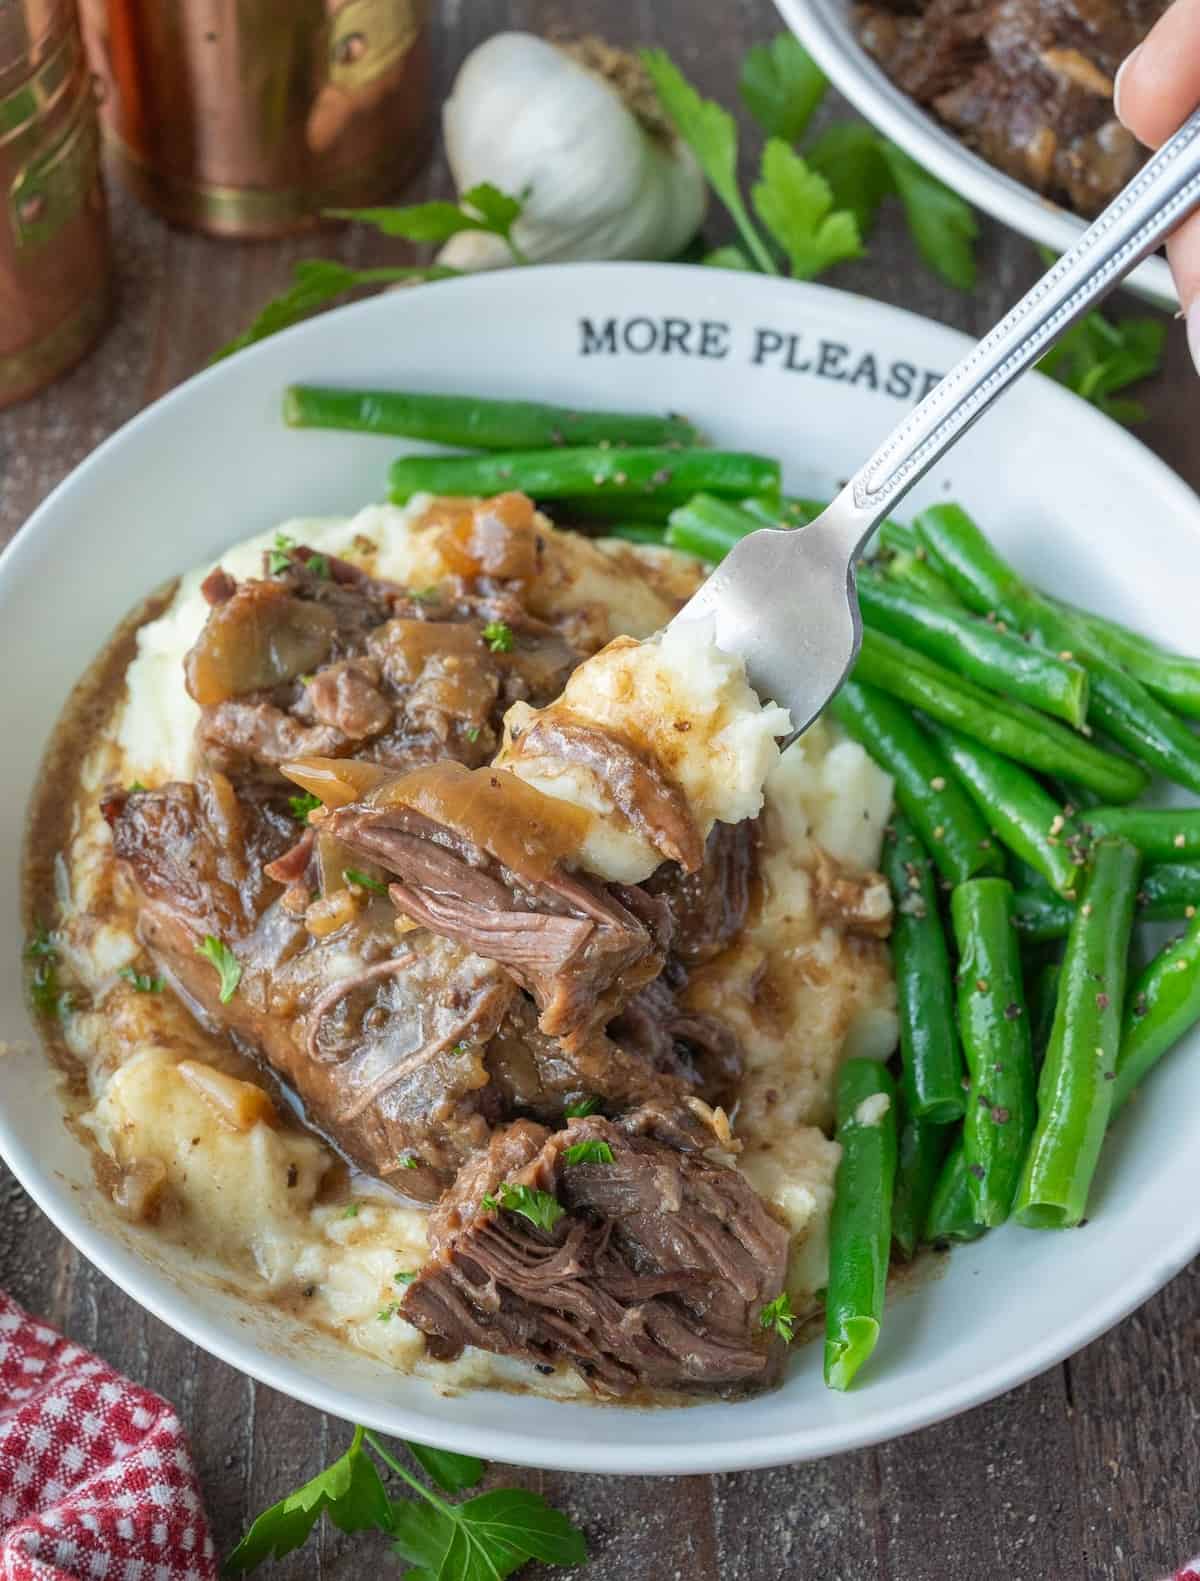 A fork scooping up a bite of beef and gravy with mashed potatoes.